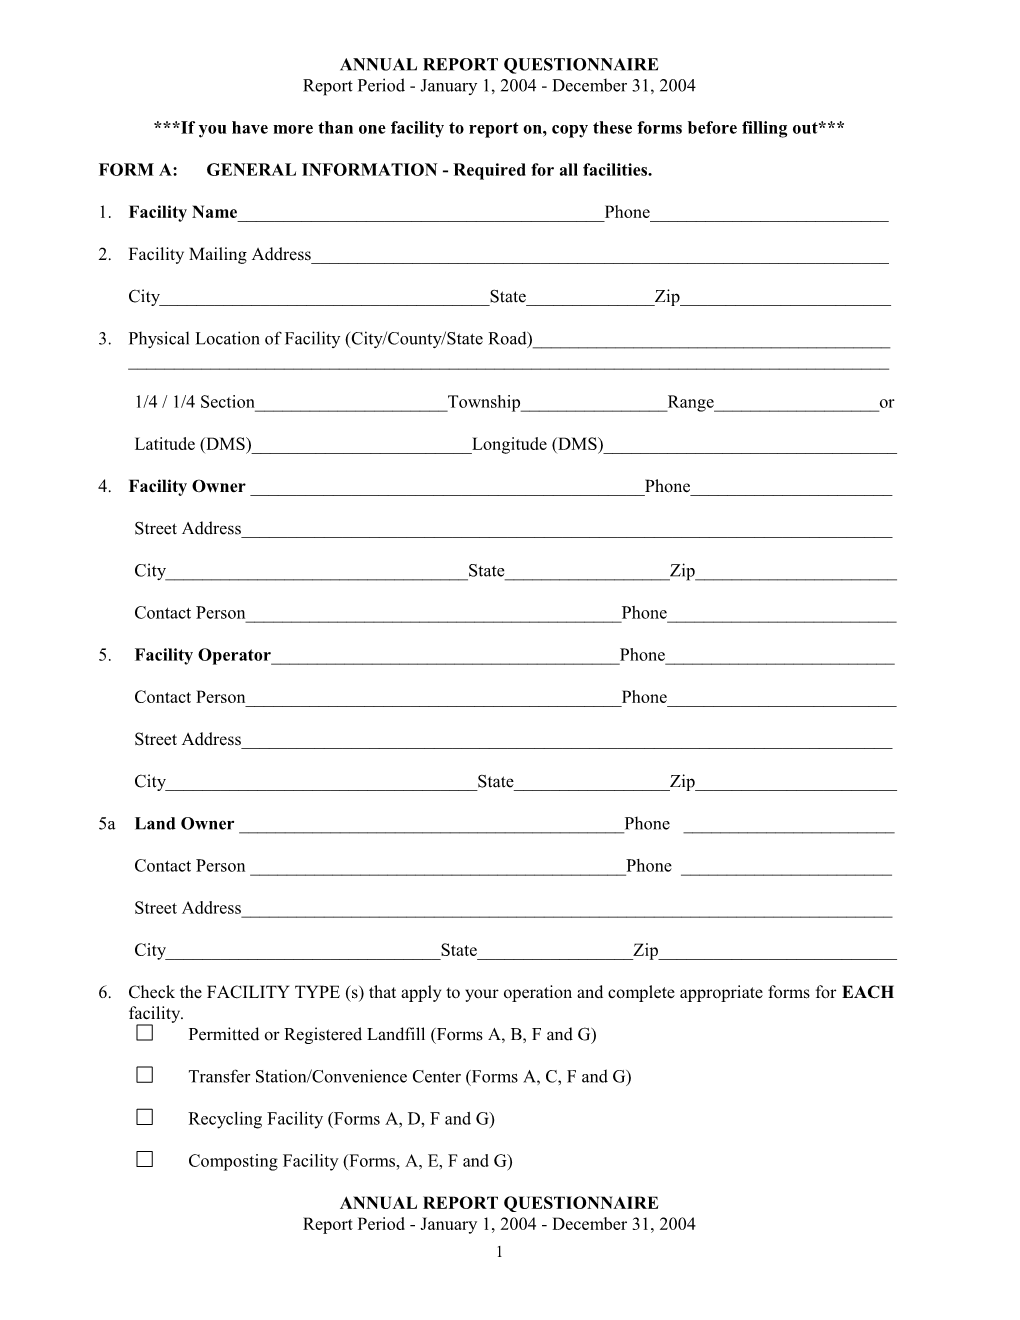 FORM A:GENERAL INFORMATION - Required for All Facilities